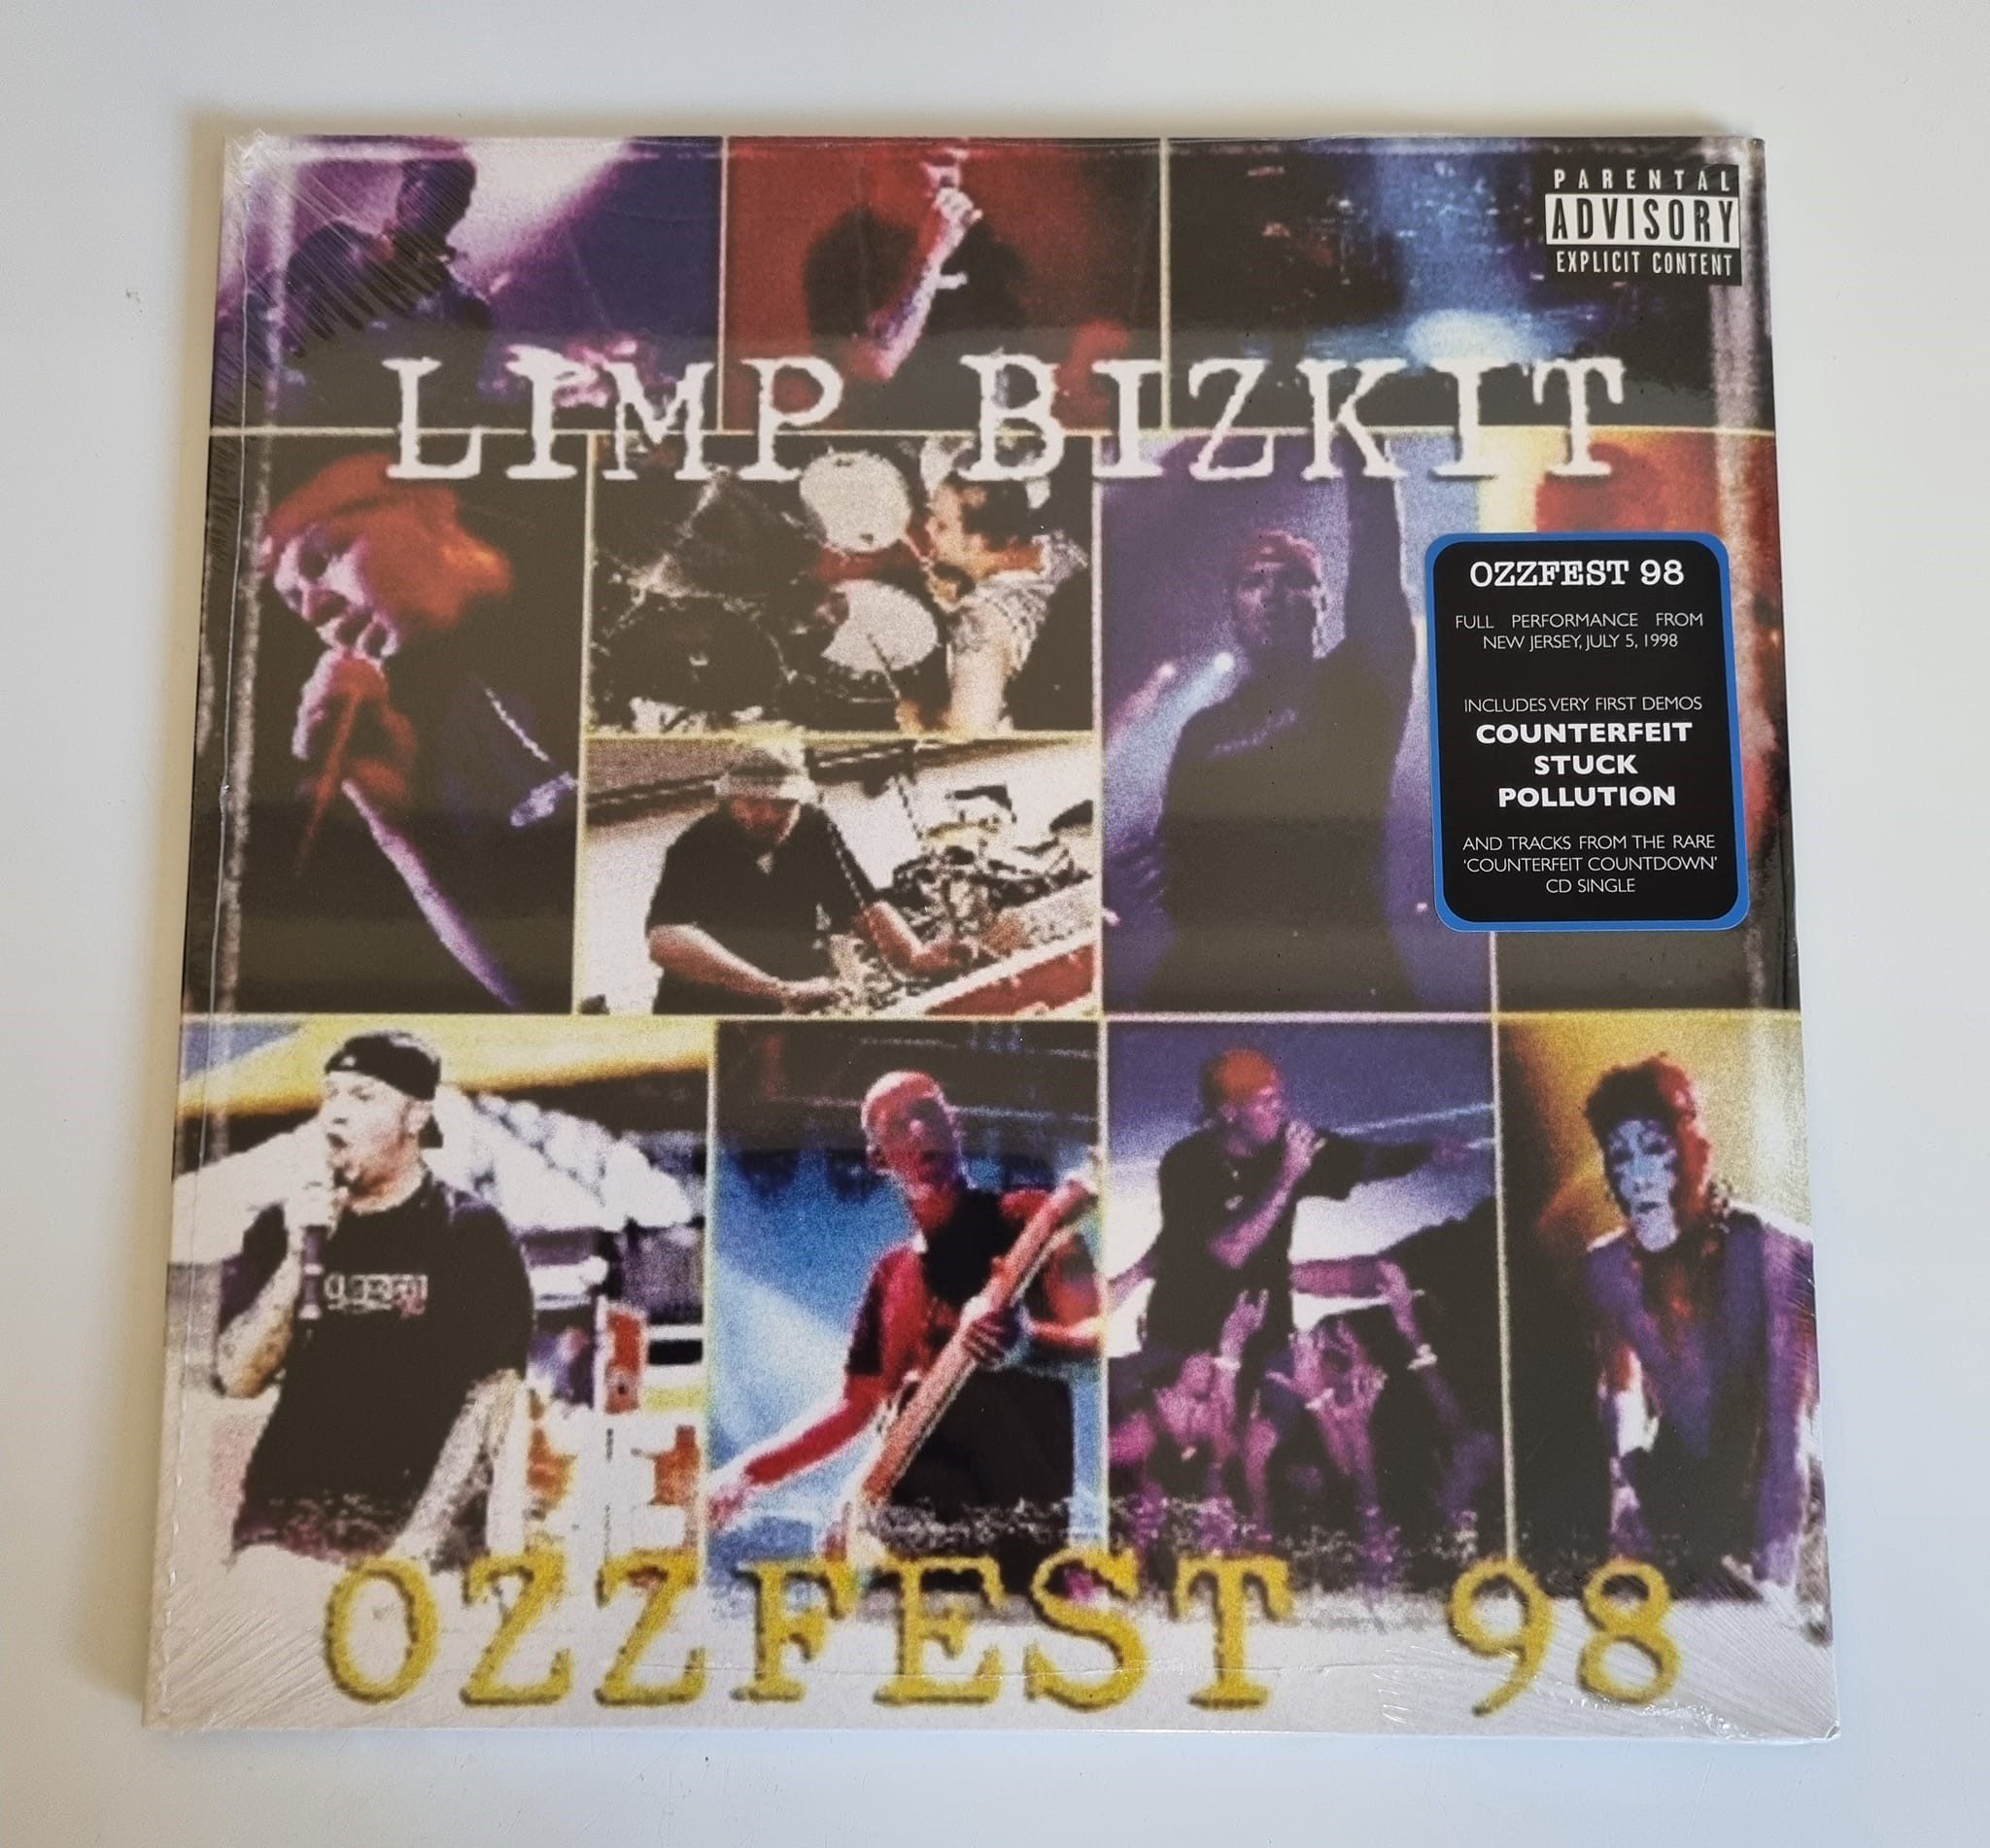 Buy this rare Linp Bizkit record by clicking here